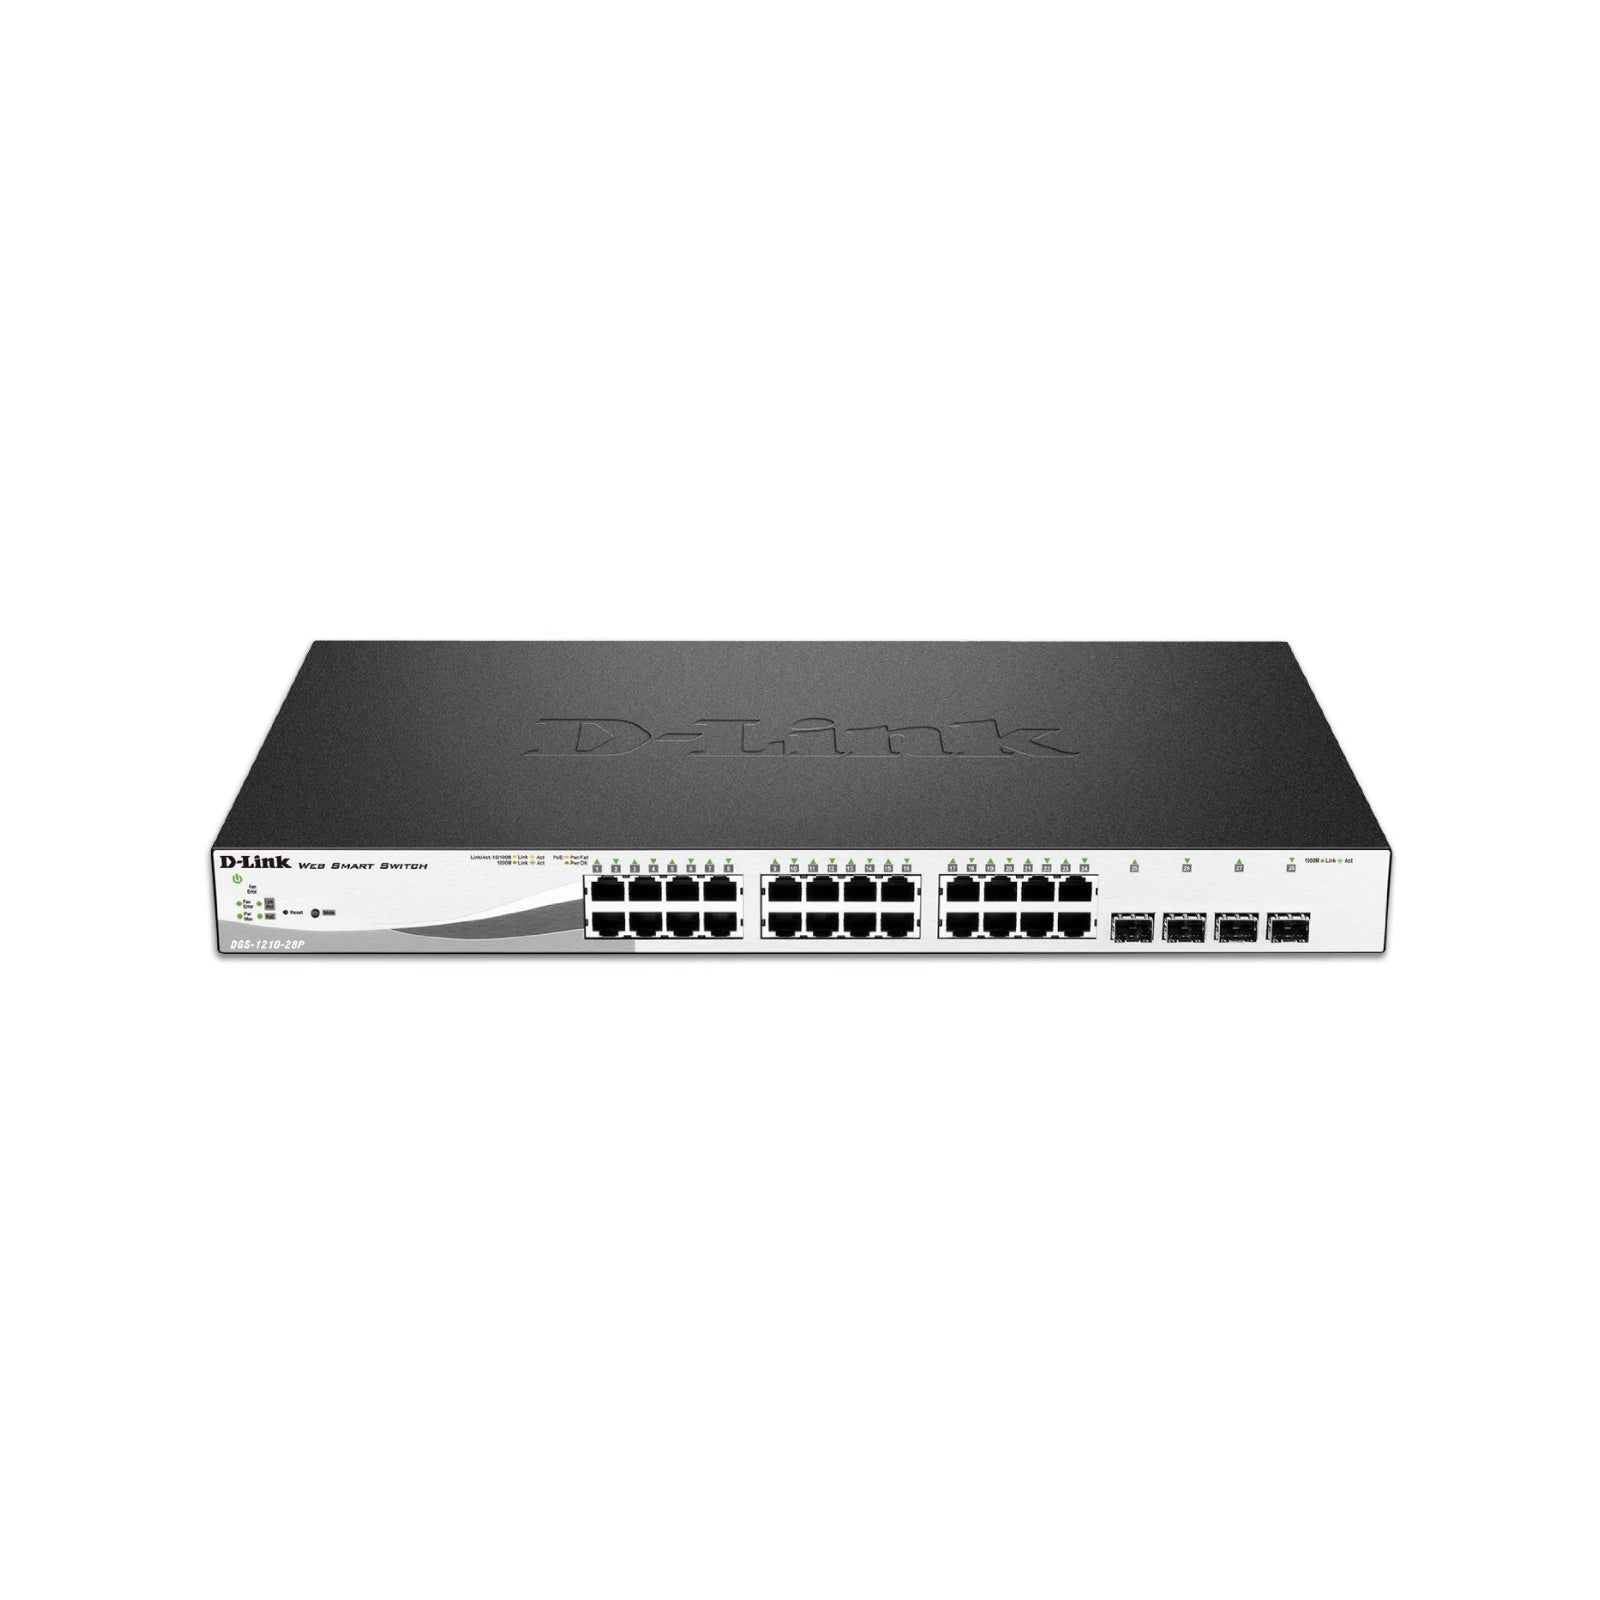 D Link 28 Port Smart Managed Poe Switch 24 X 1 Gbe Ports 4 X 1 Gbps Sfp Ports 193 W Poe Budget Rackmount Form Factor - Vice-Tech